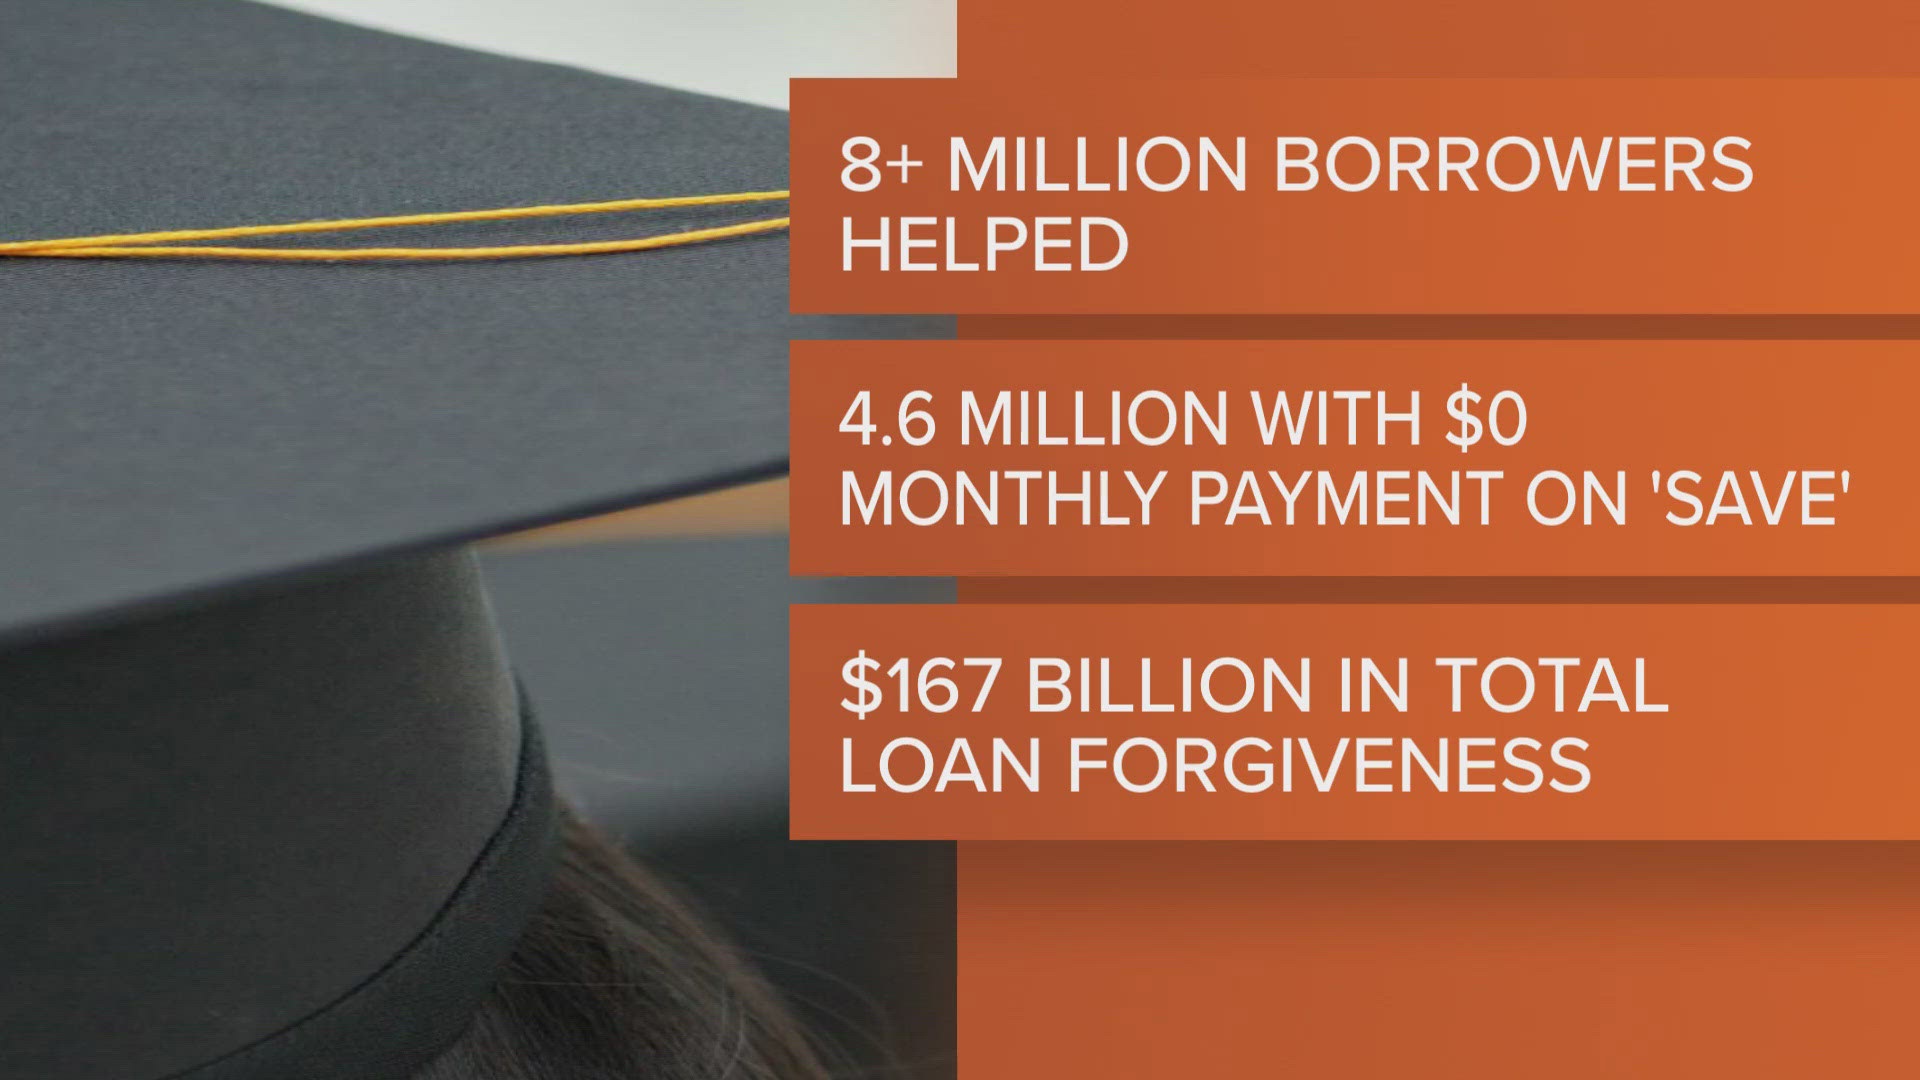 Within the past hour, the Biden Administration announced an additional $7.7B in student debt relief.